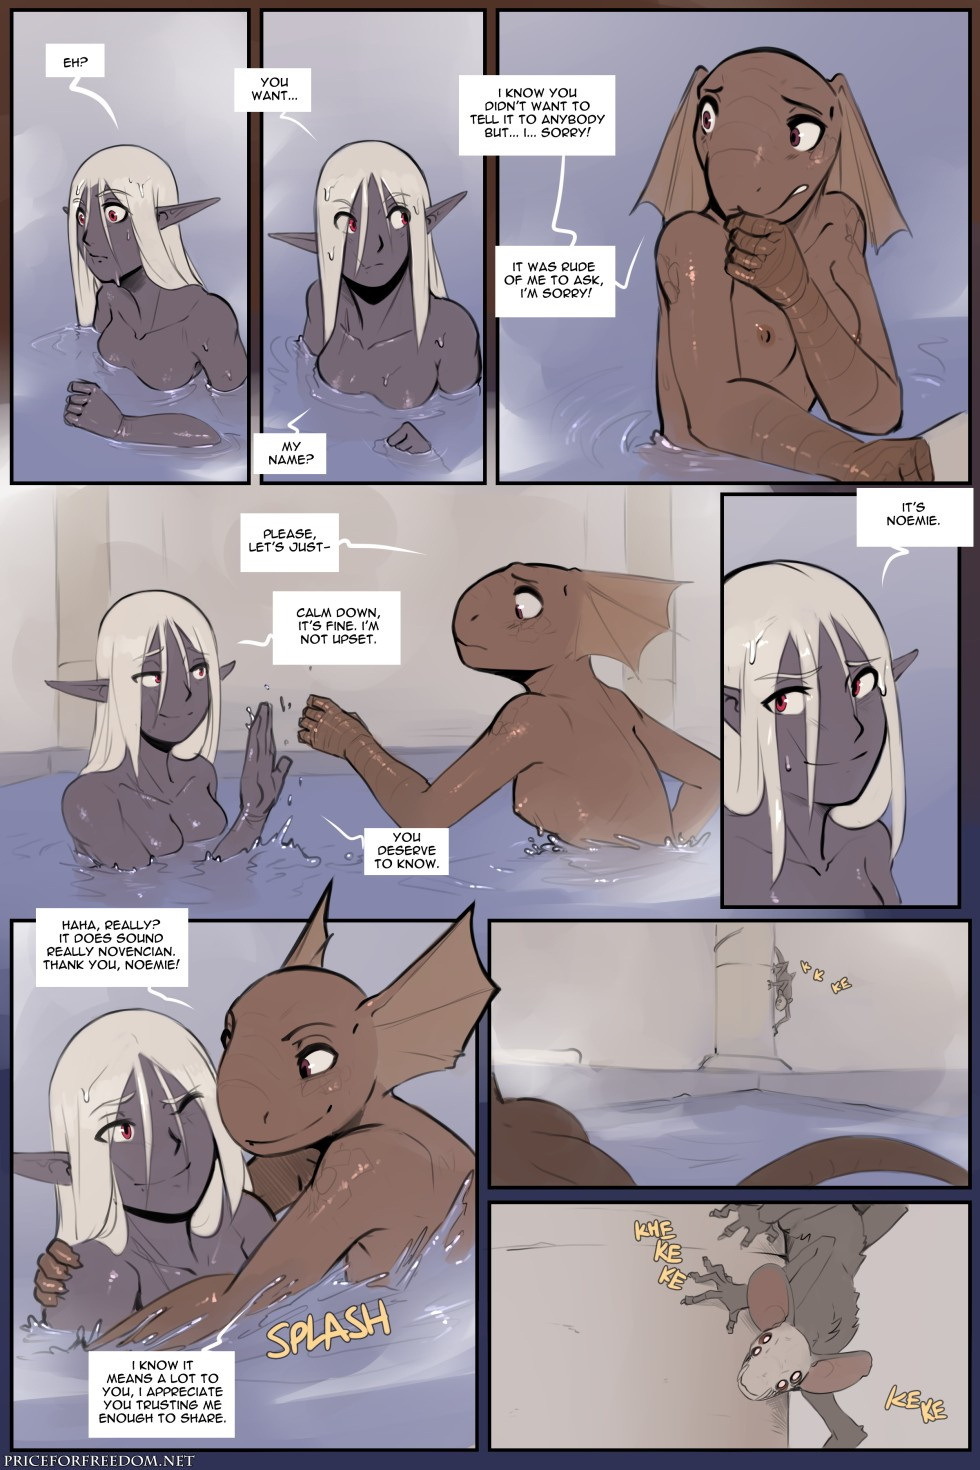 Price For Freedom - Page 369